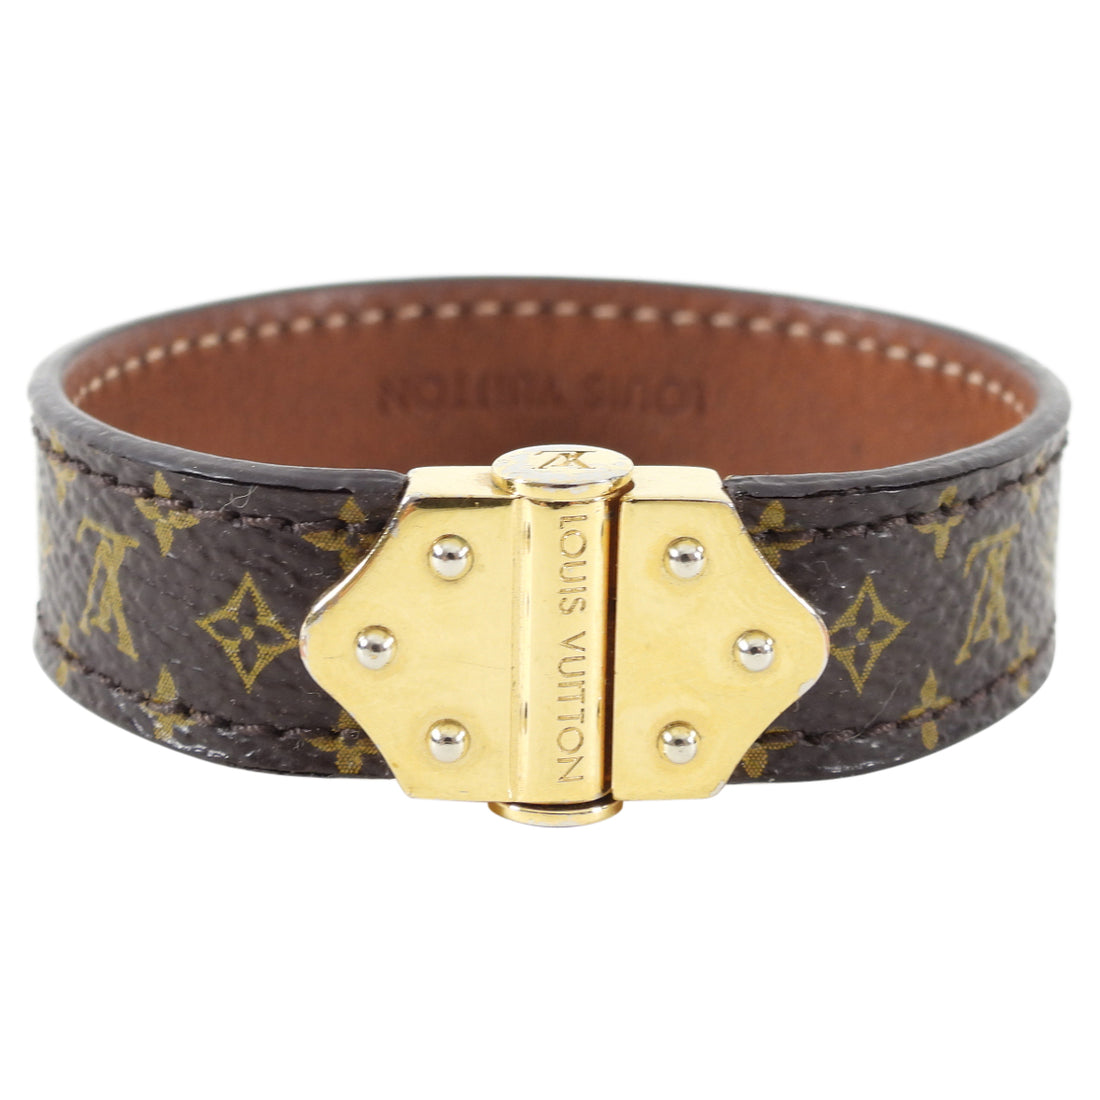 Discover The Perfect Size 19 Louis Vuitton Bracelet And More   Sweetandspark